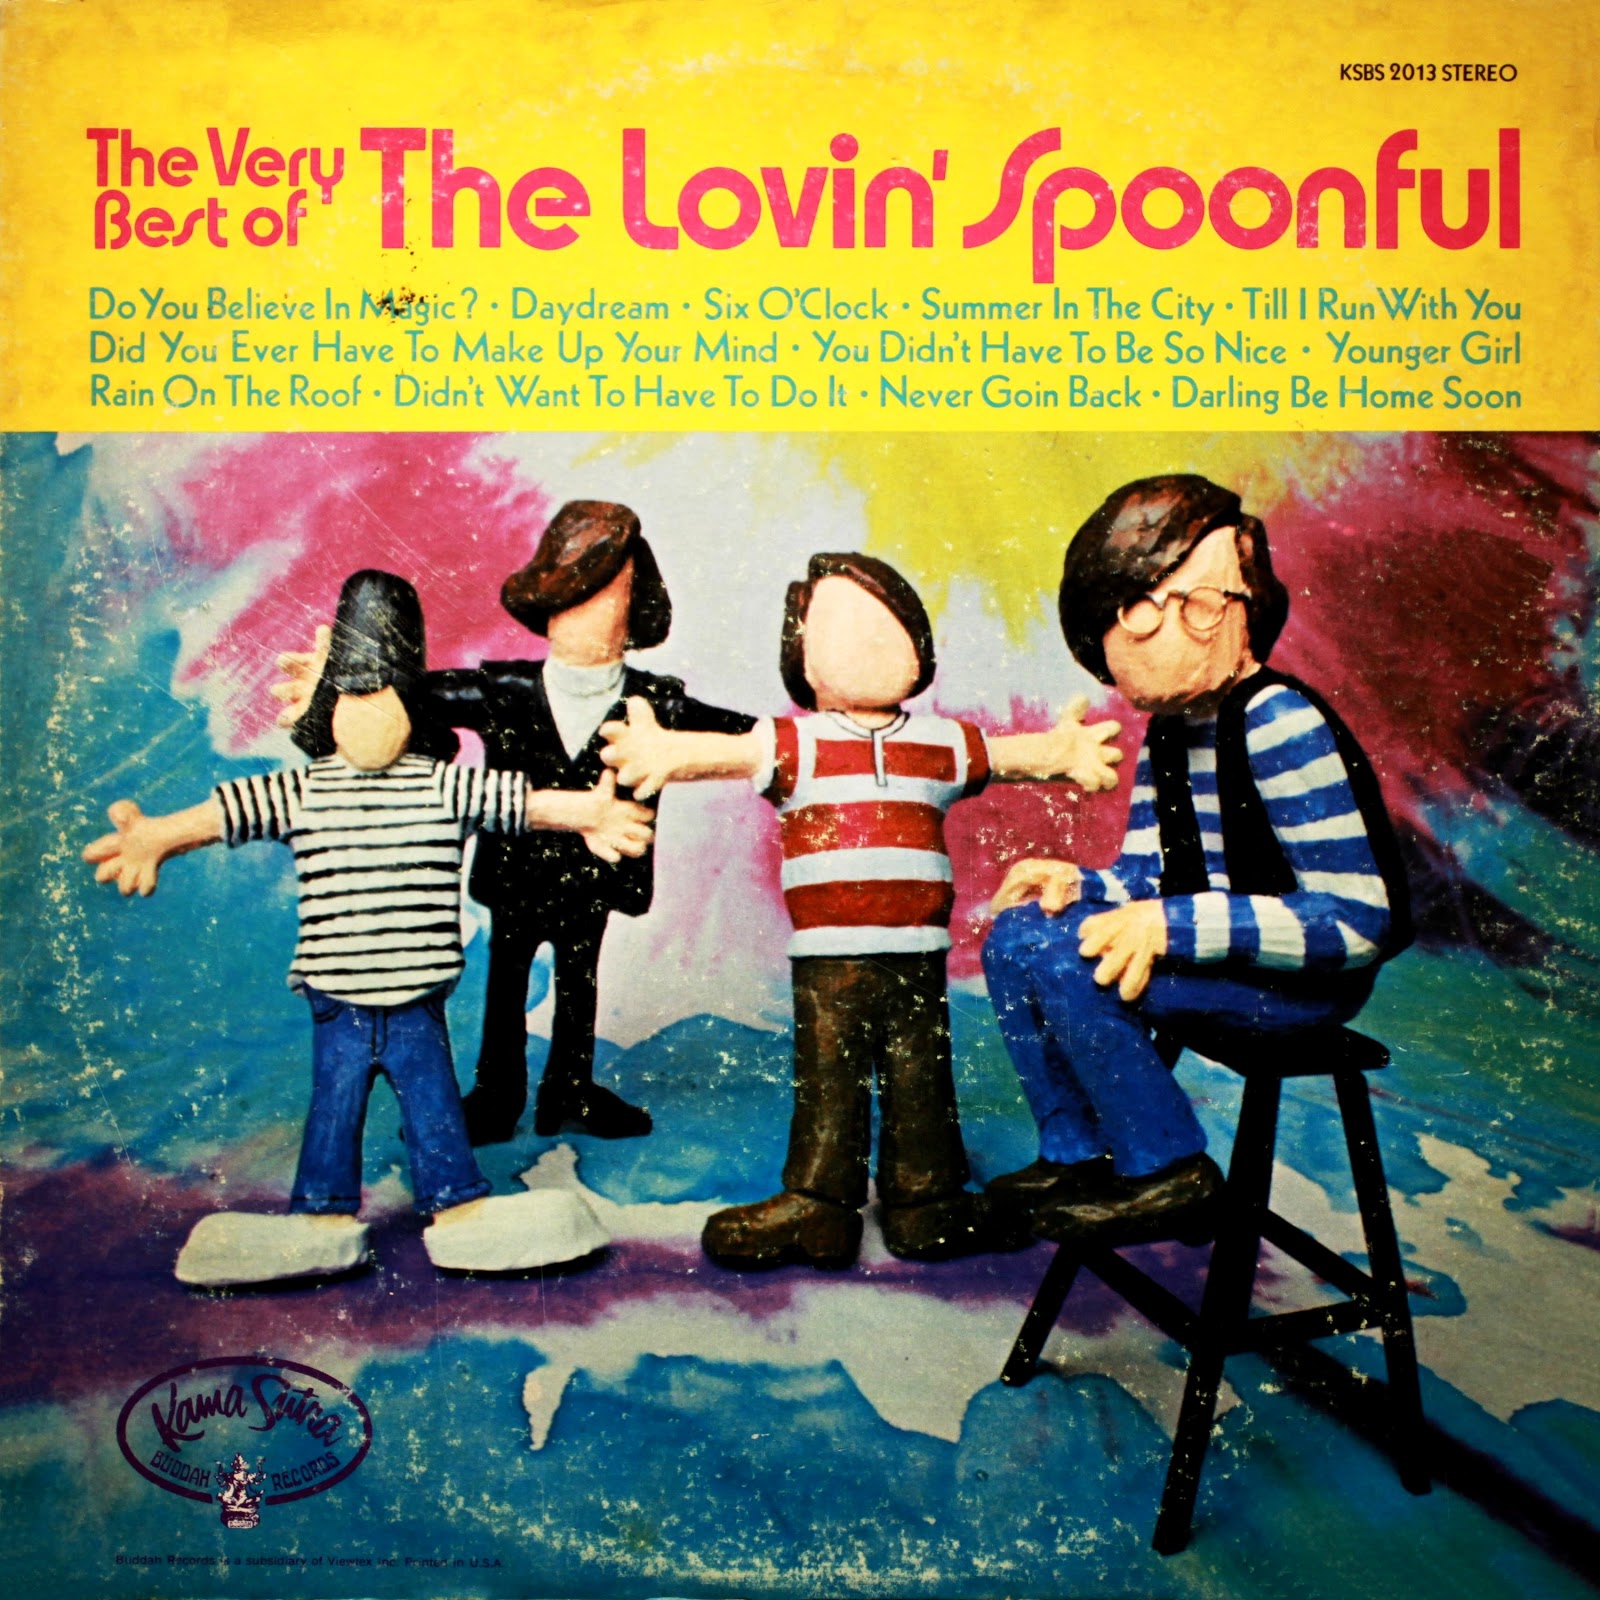 1970 The Very Best of - The Lovin' Spoonful.